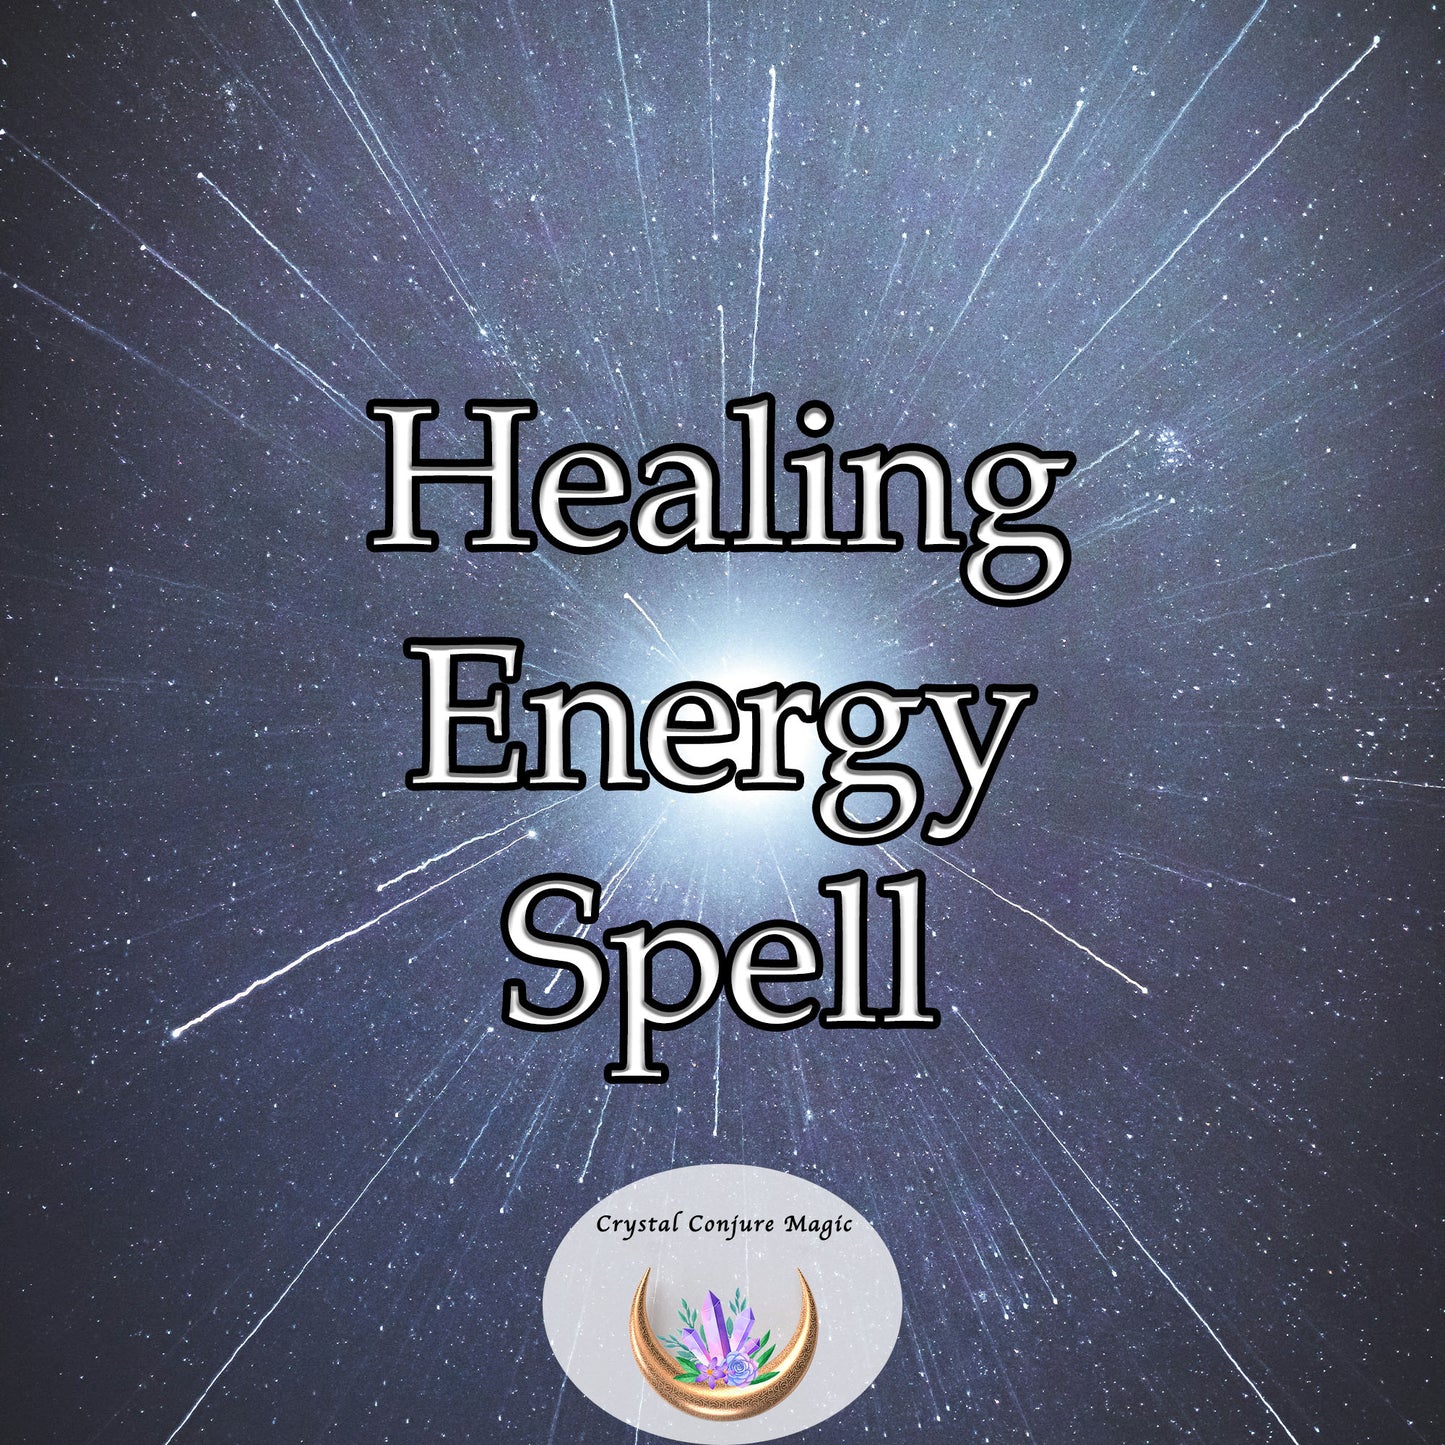 Healing Energy Spell - infuse yourself with revitalizing energies, fostering balance, wellness, and strength